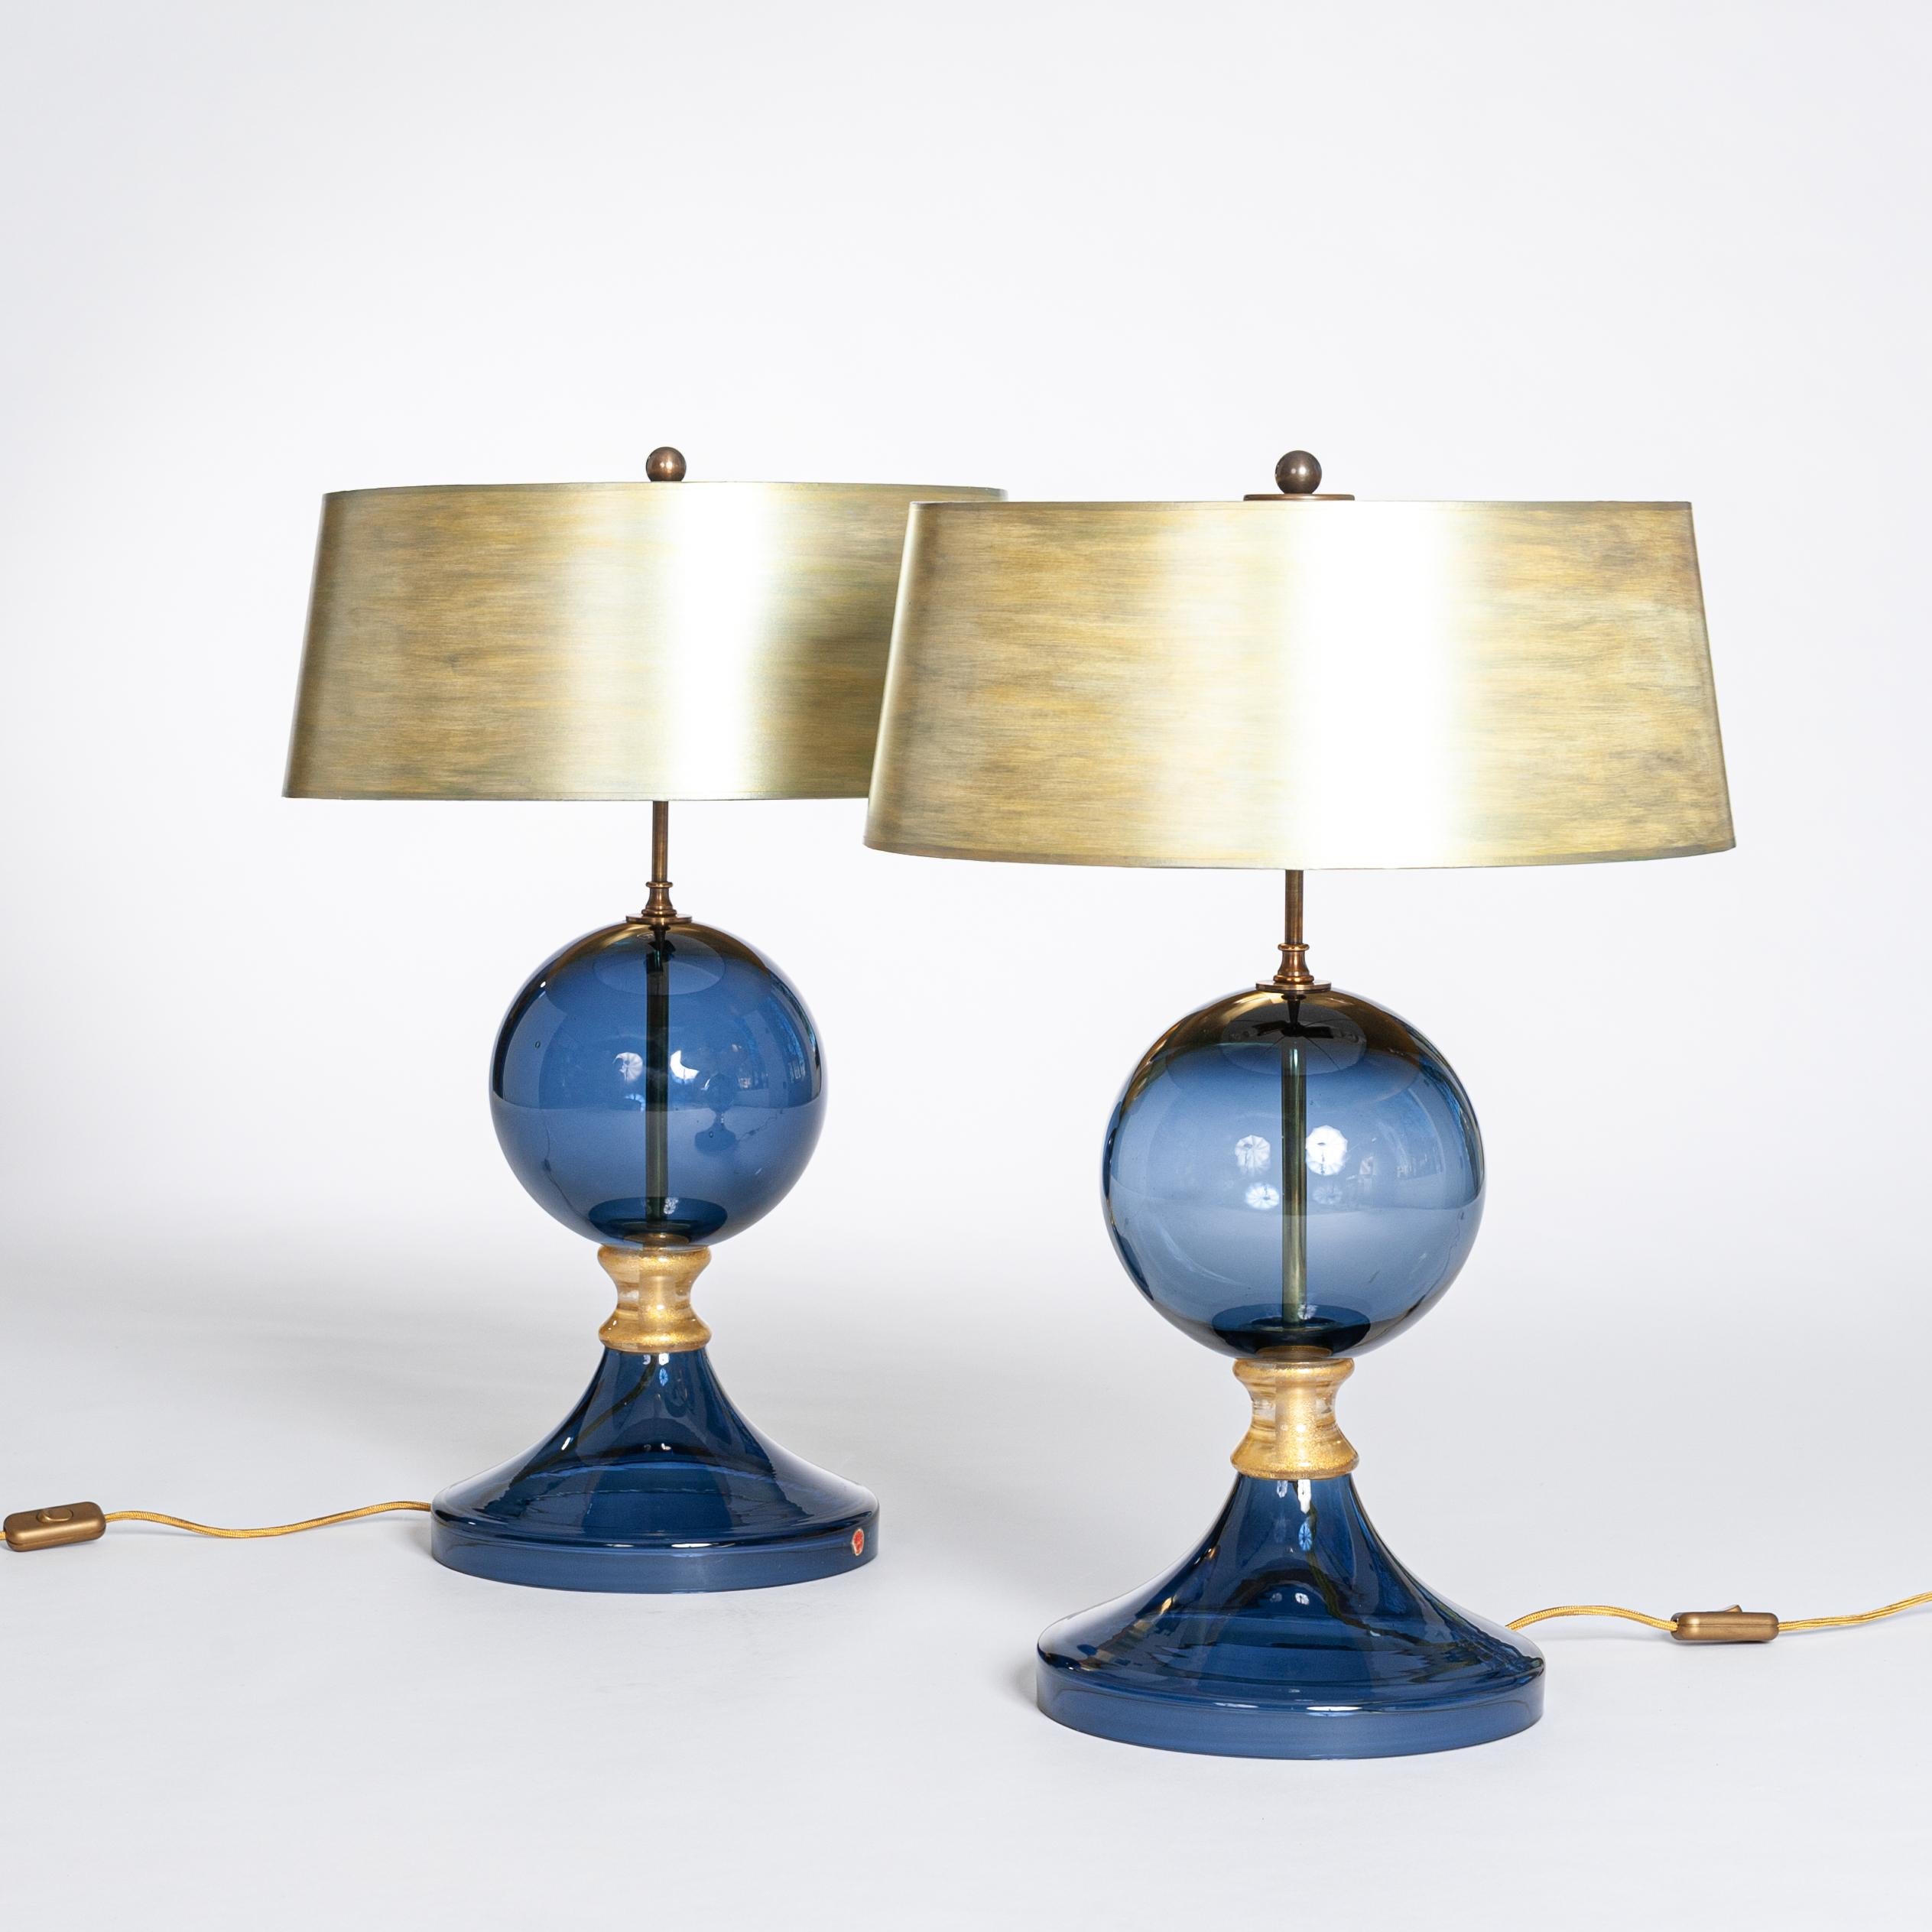 Exceptional Murano glass table lamps in dark blue and gold. 
The conical shade is hand painted in several colors. 
The shade is gold-colored on the inside, which creates a warm light.
Size of the lamp shade: Diameter 40/45cm x Height 18cm
Size of